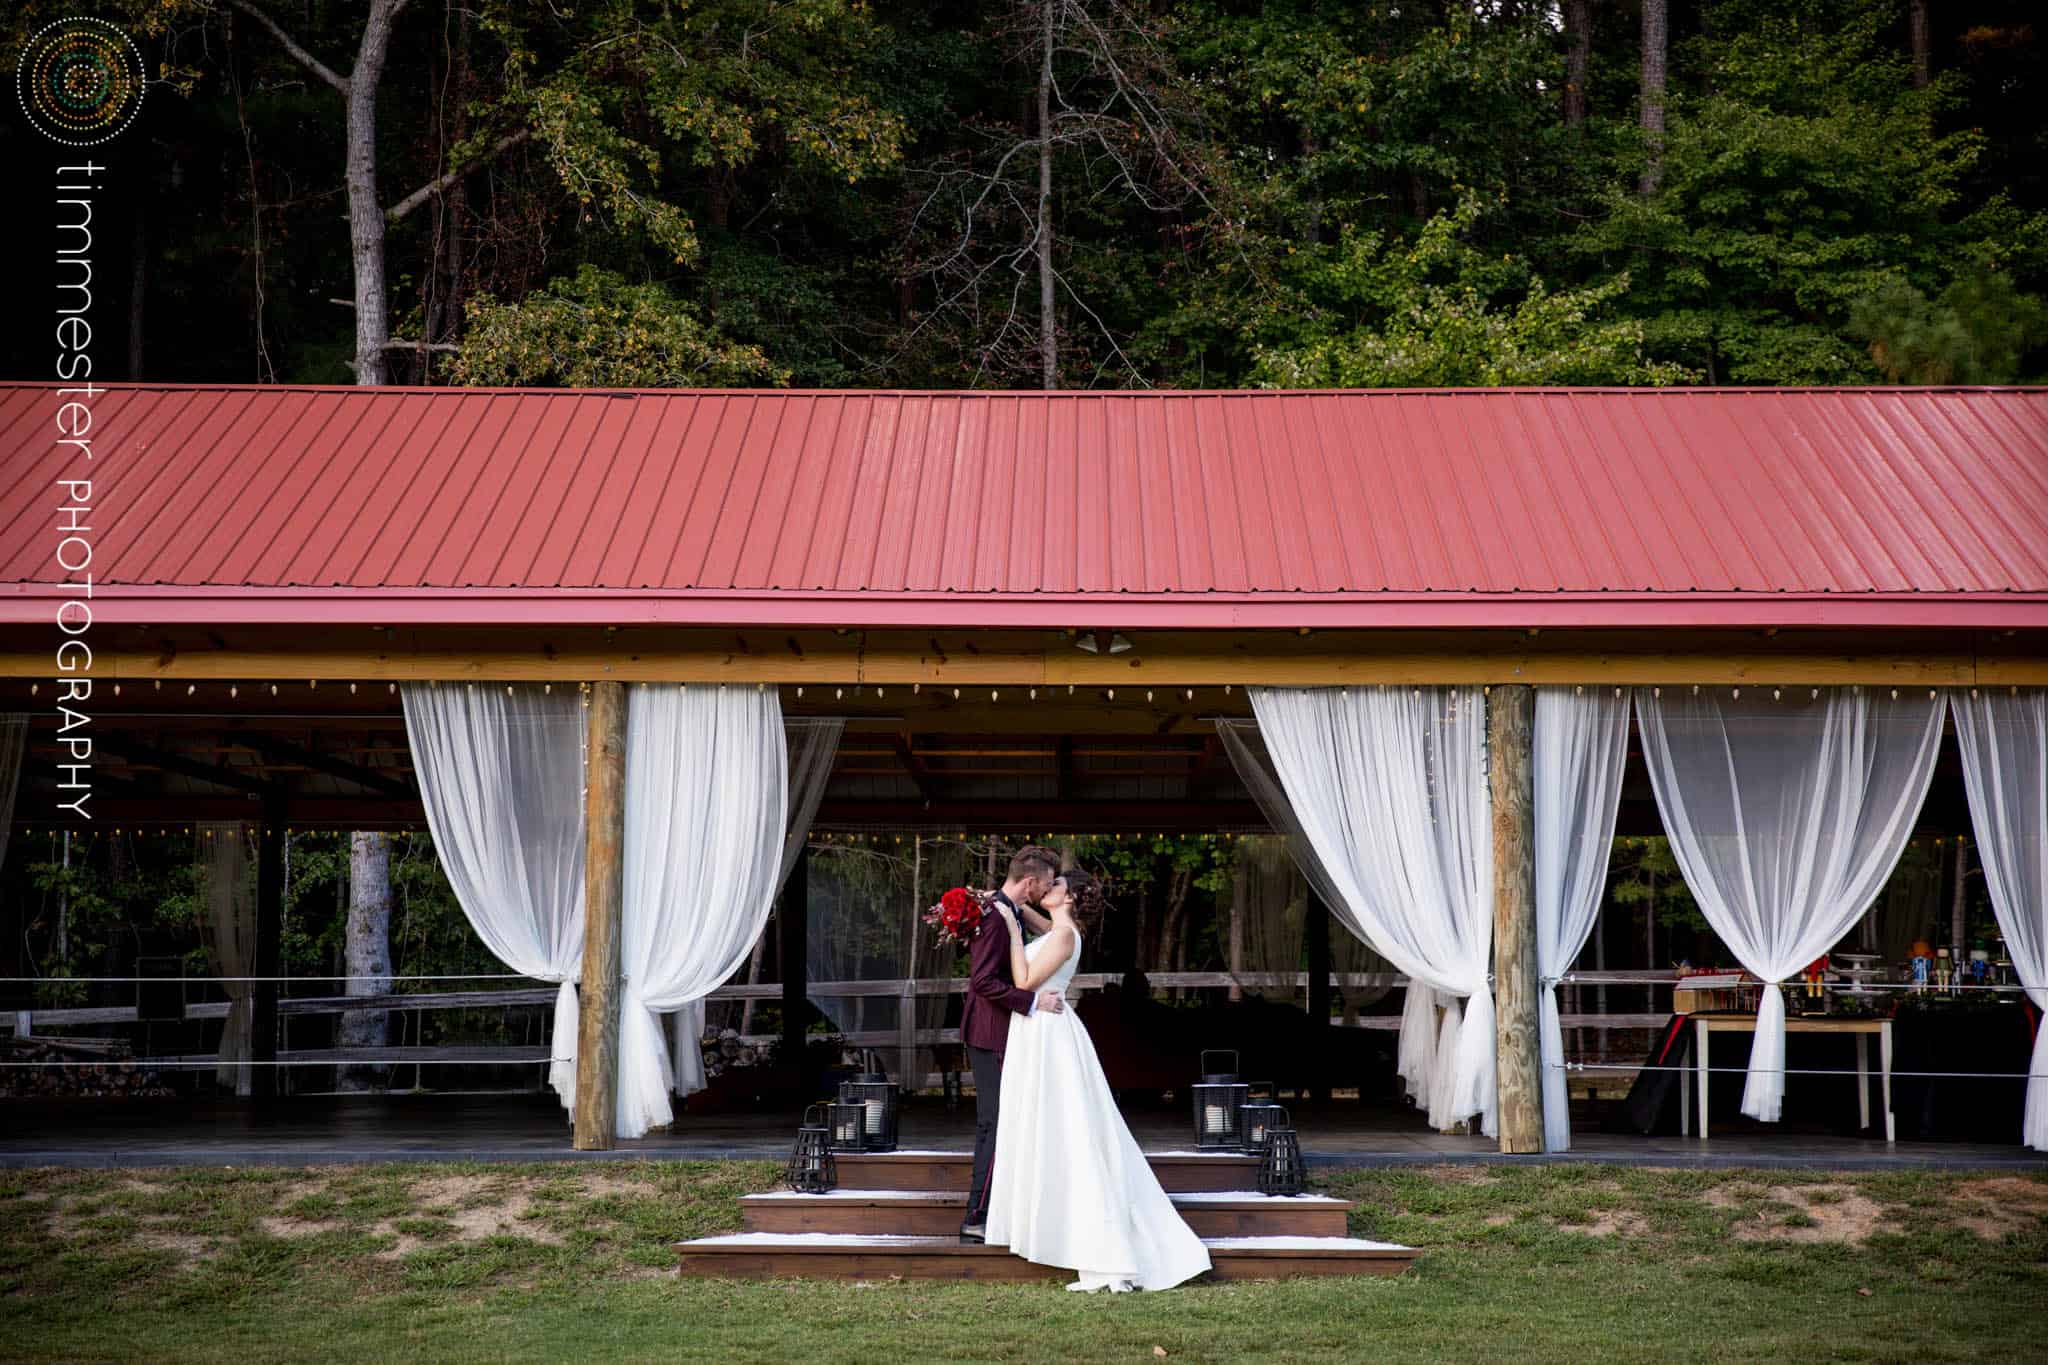 Bride and Groom kissing in front of barn